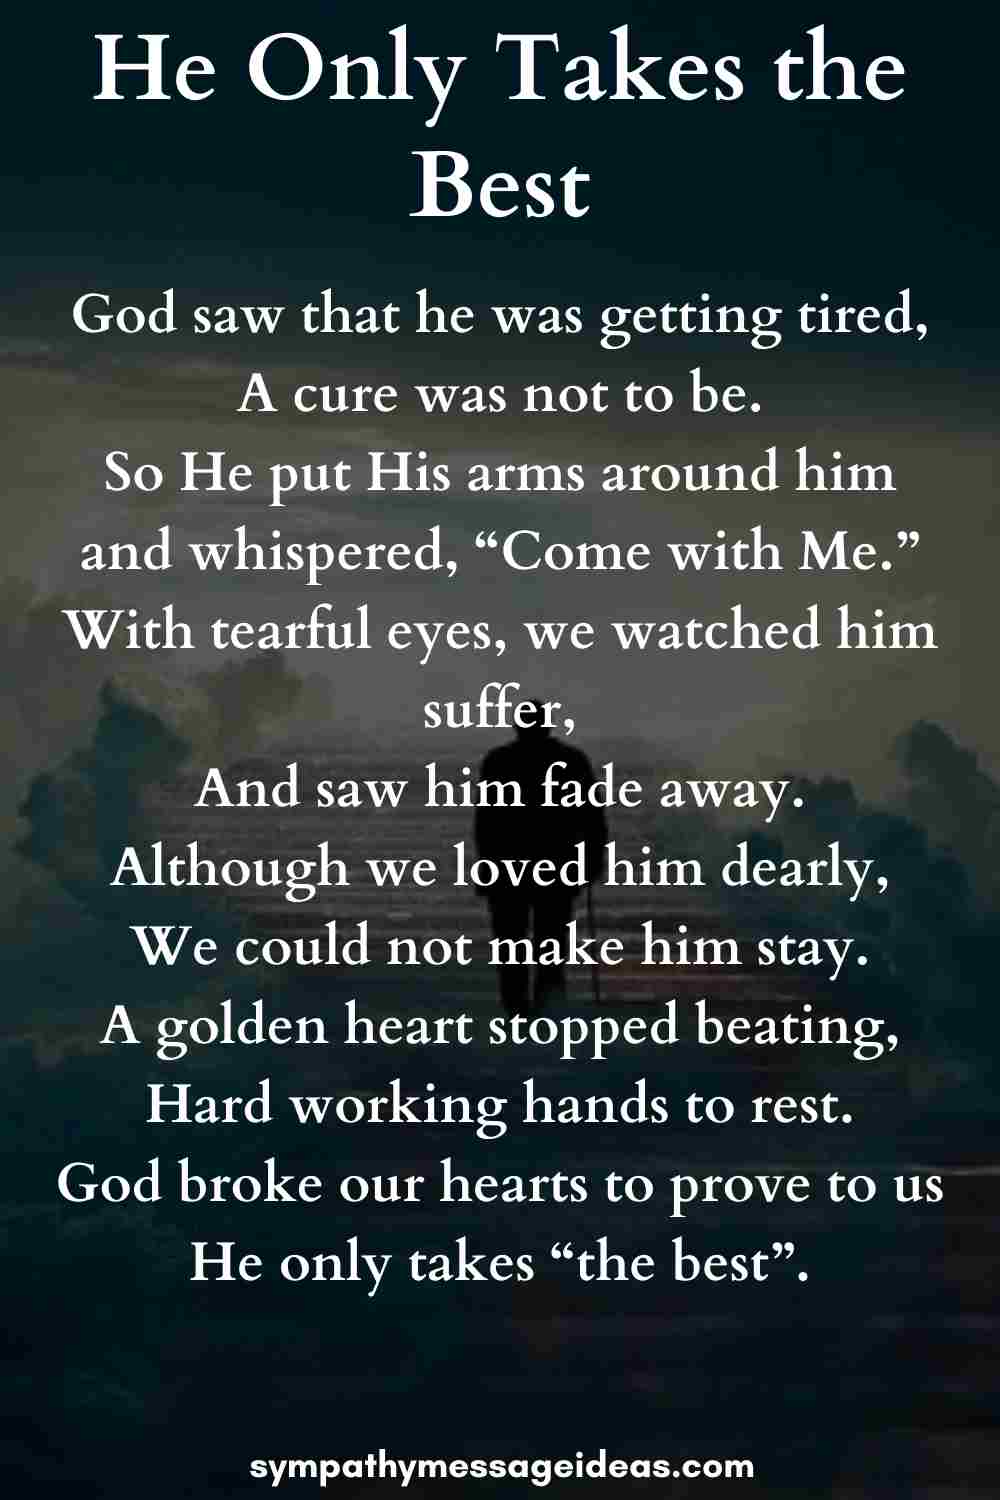 39-moving-funeral-poems-for-dads-sympathy-message-ideas